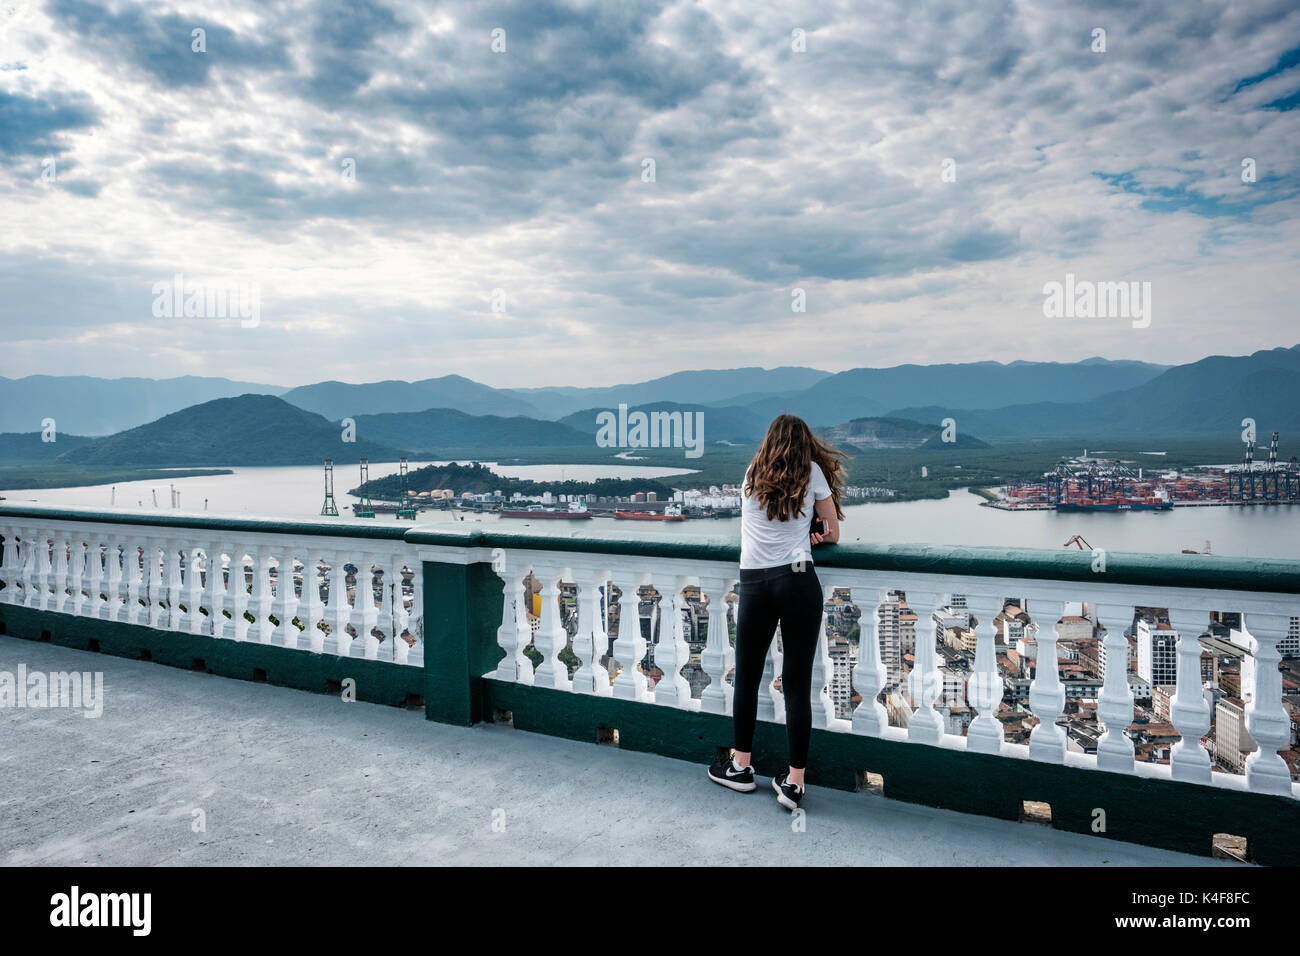 Teenager girl appreciating the view from the top of Monte Serrat, overlooking the port of Santos, state of Sao Paulo, Brazil. Stock Photo